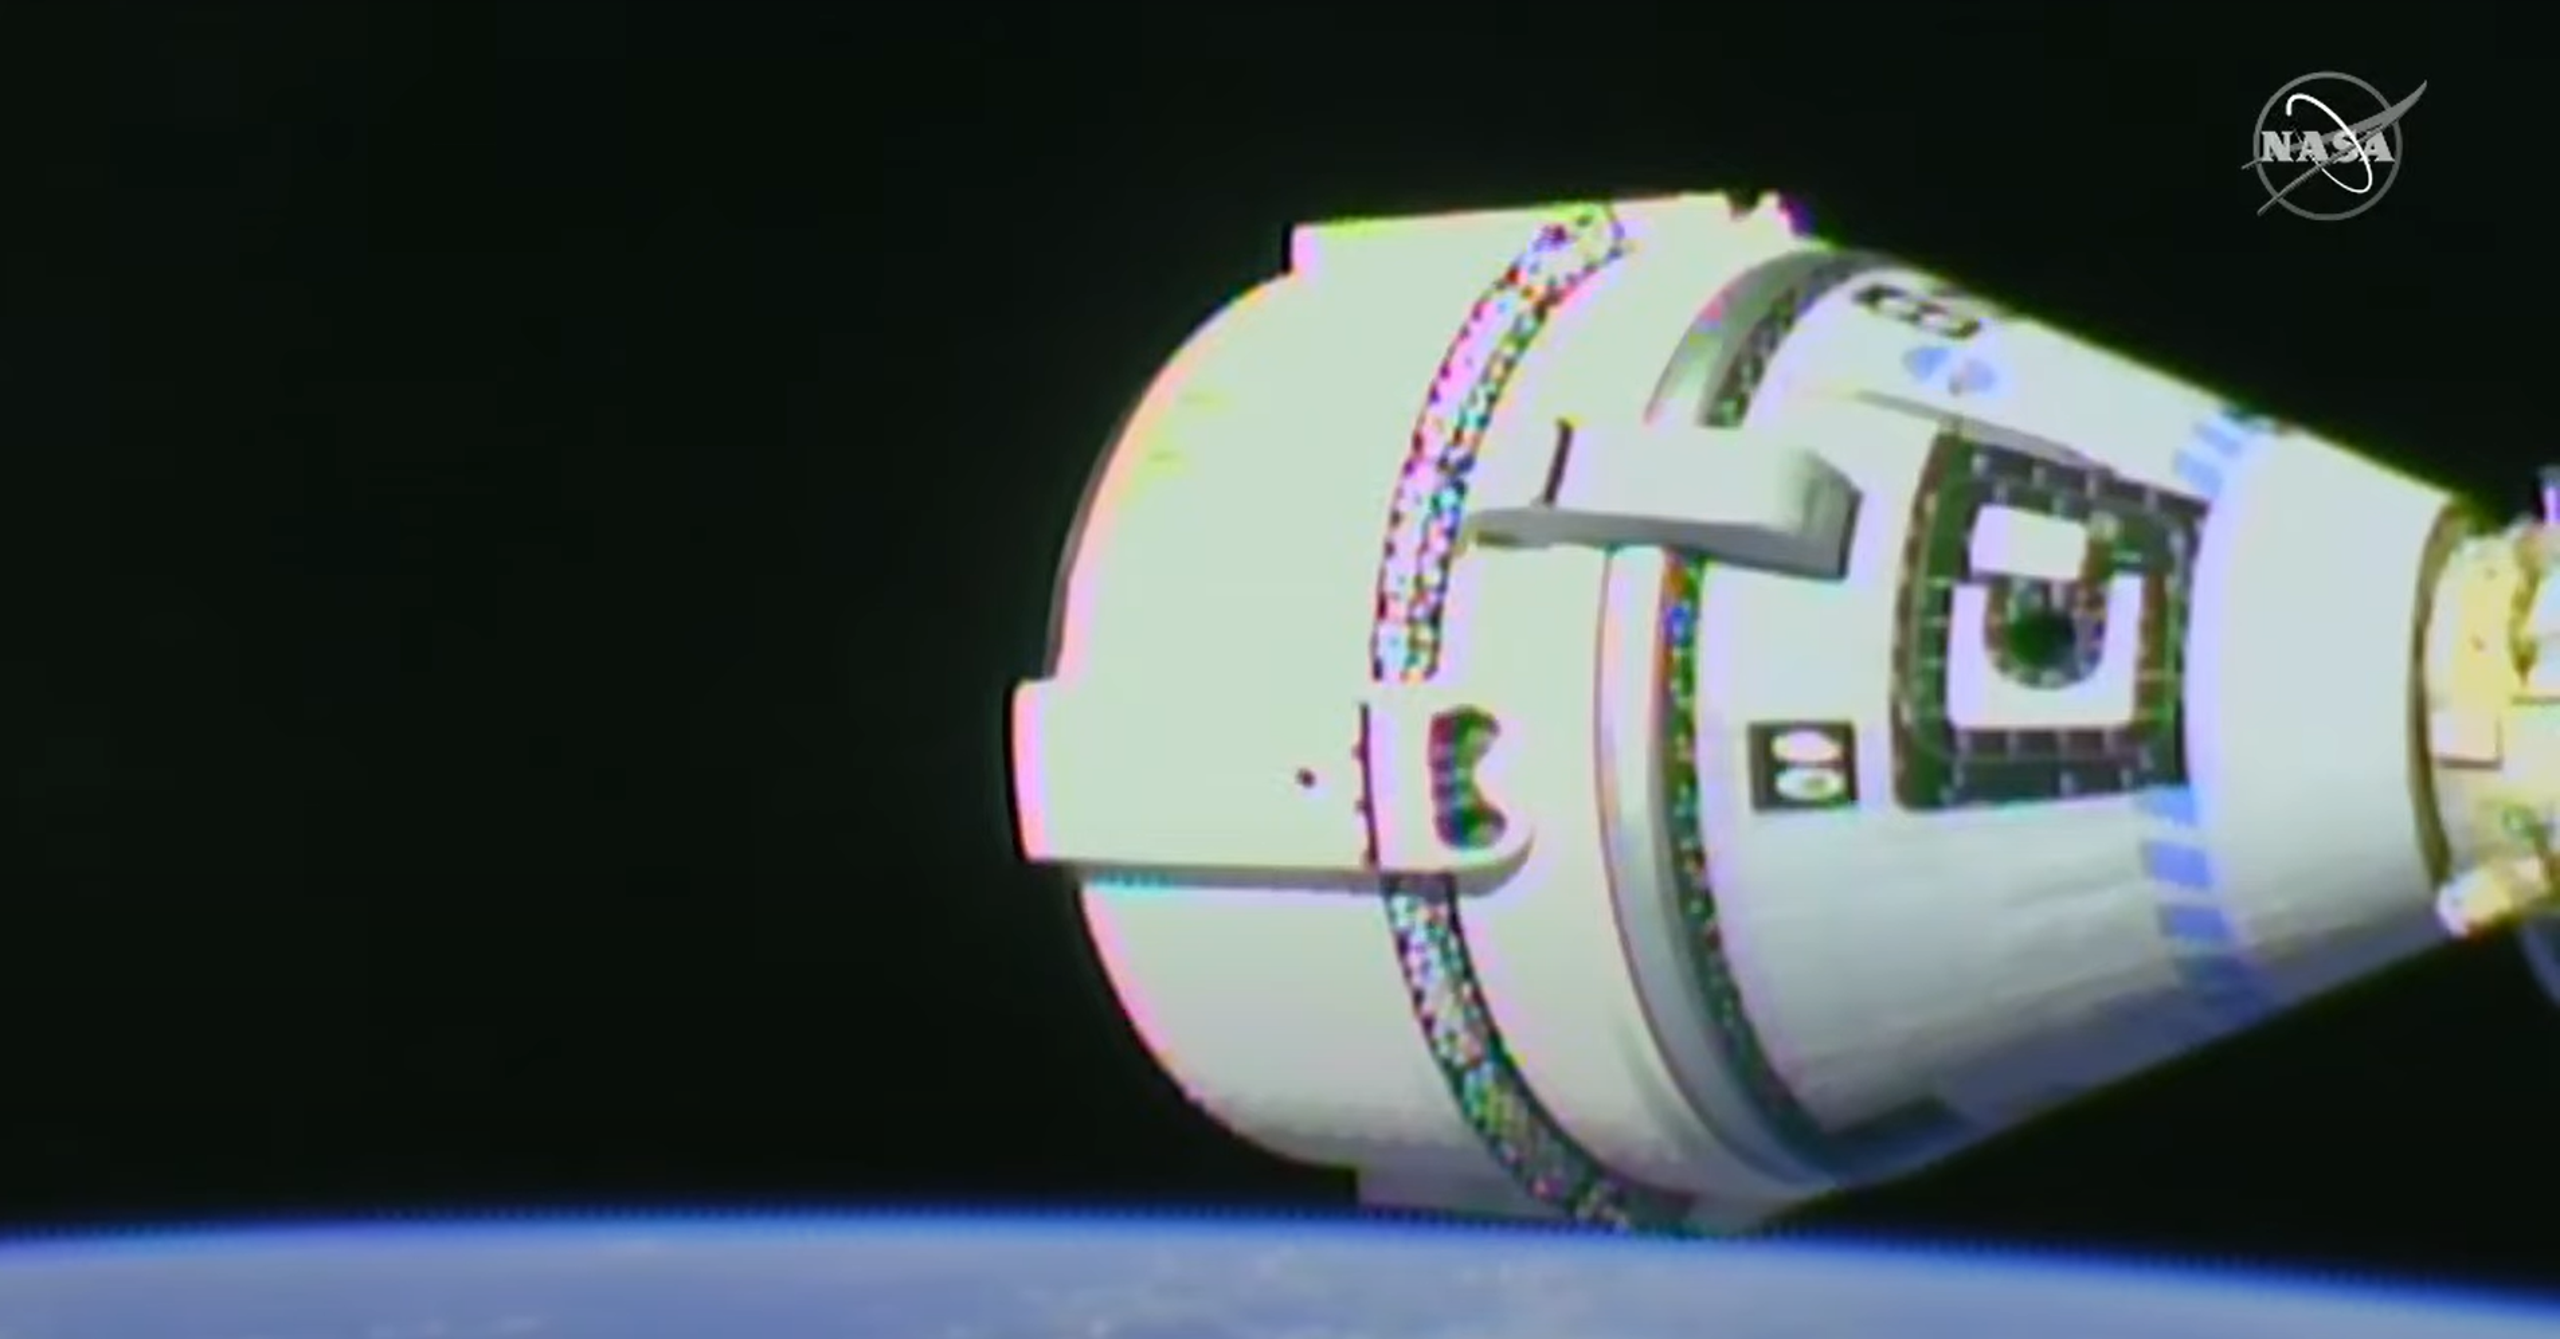 A screen capture of the Boeing Starliner capsule docked for the first time to the International Space Station during NASA's Commercial Crew Program OFT-2 mission.